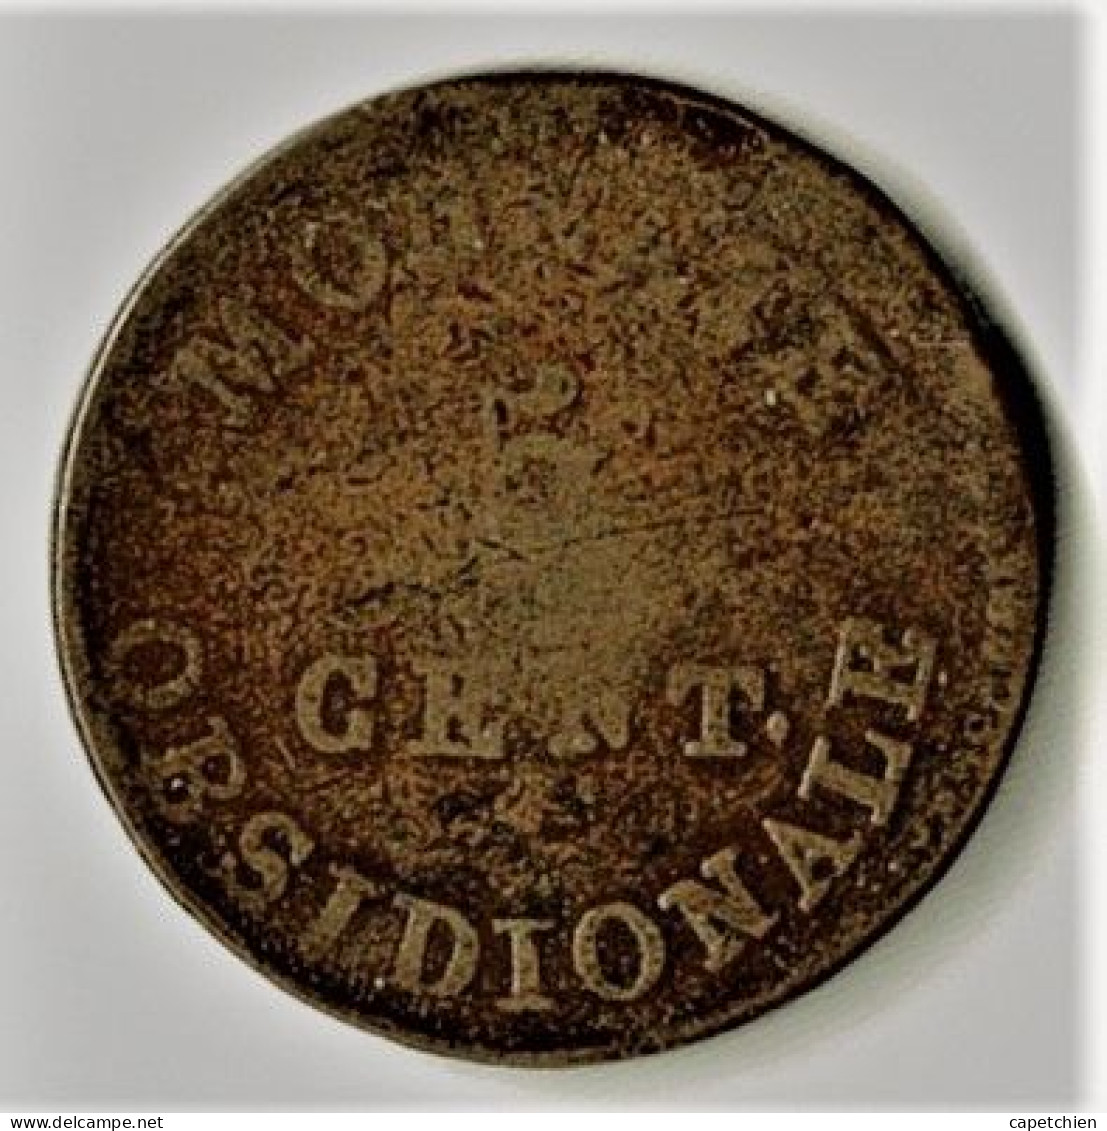 FRANCE / SIEGE D ANVERS / 1814 / 5 CENTS - 1814 Siege Of Antwerp